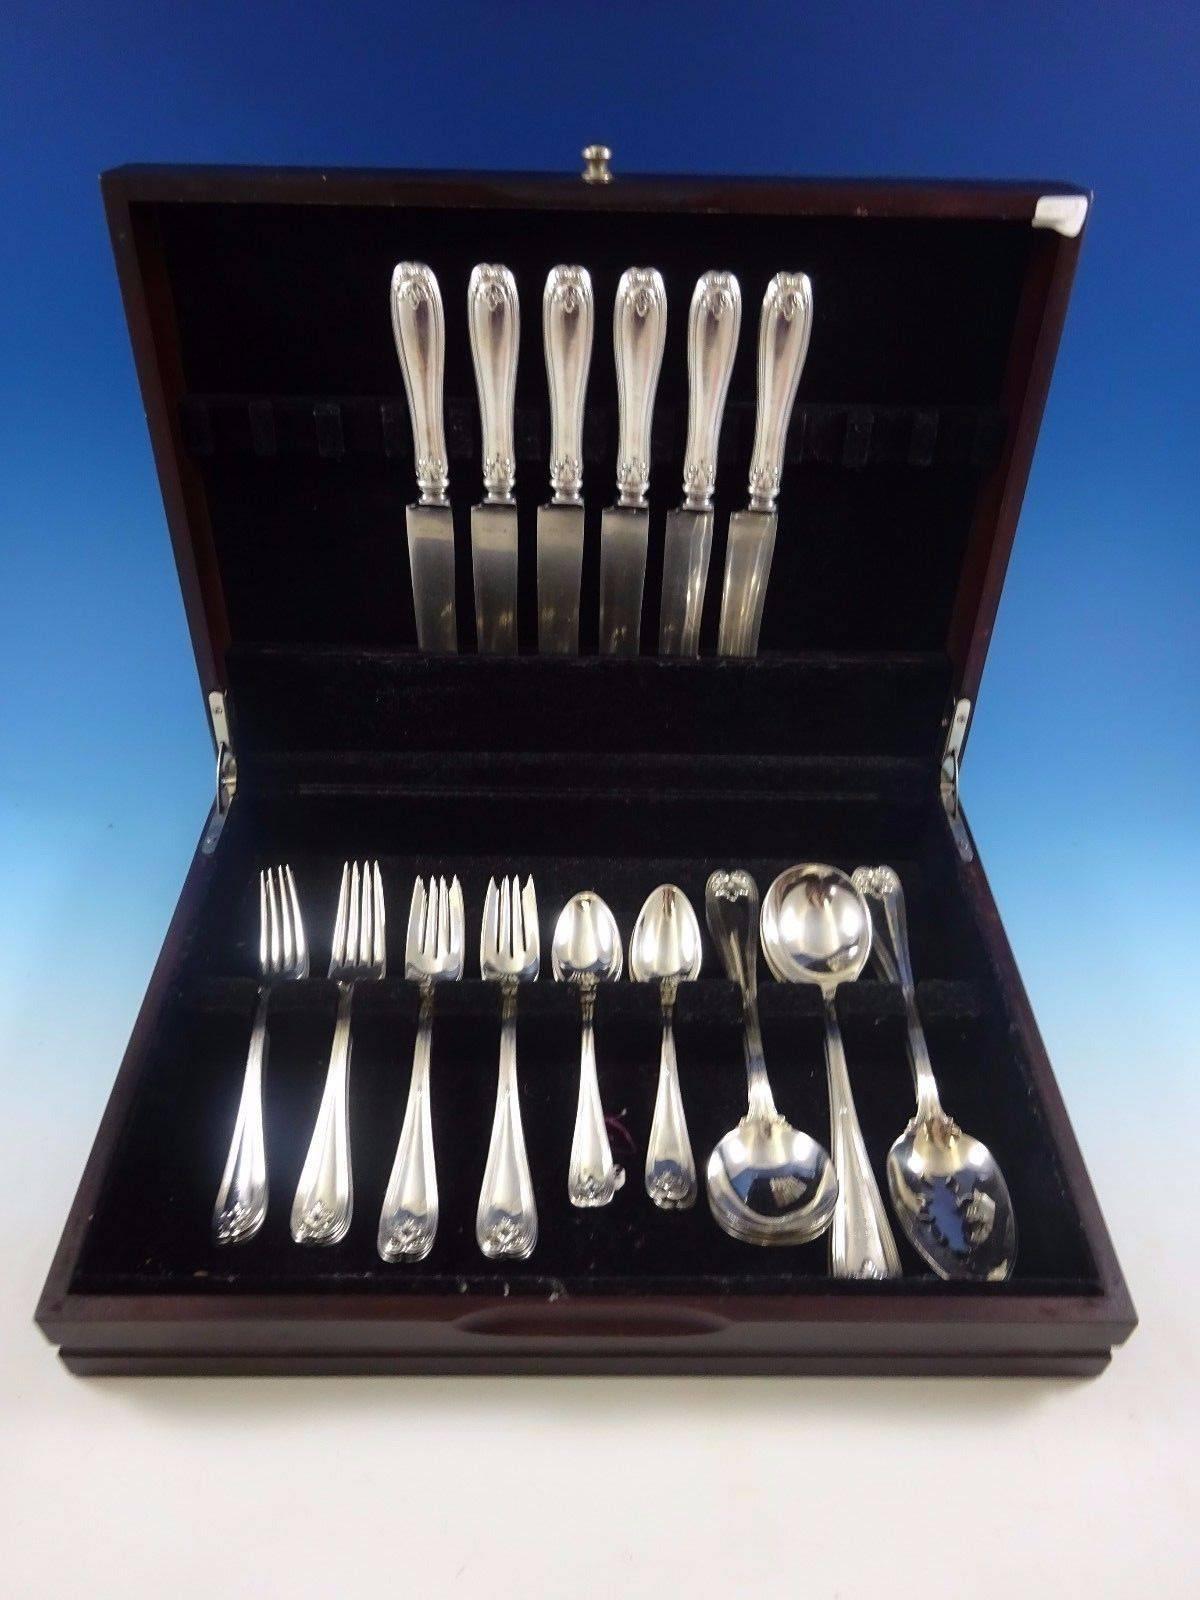 Colonial by Tiffany Sterling Silver flatware set - 32 pieces. Great starter set! This set includes: 6 Knives, 9